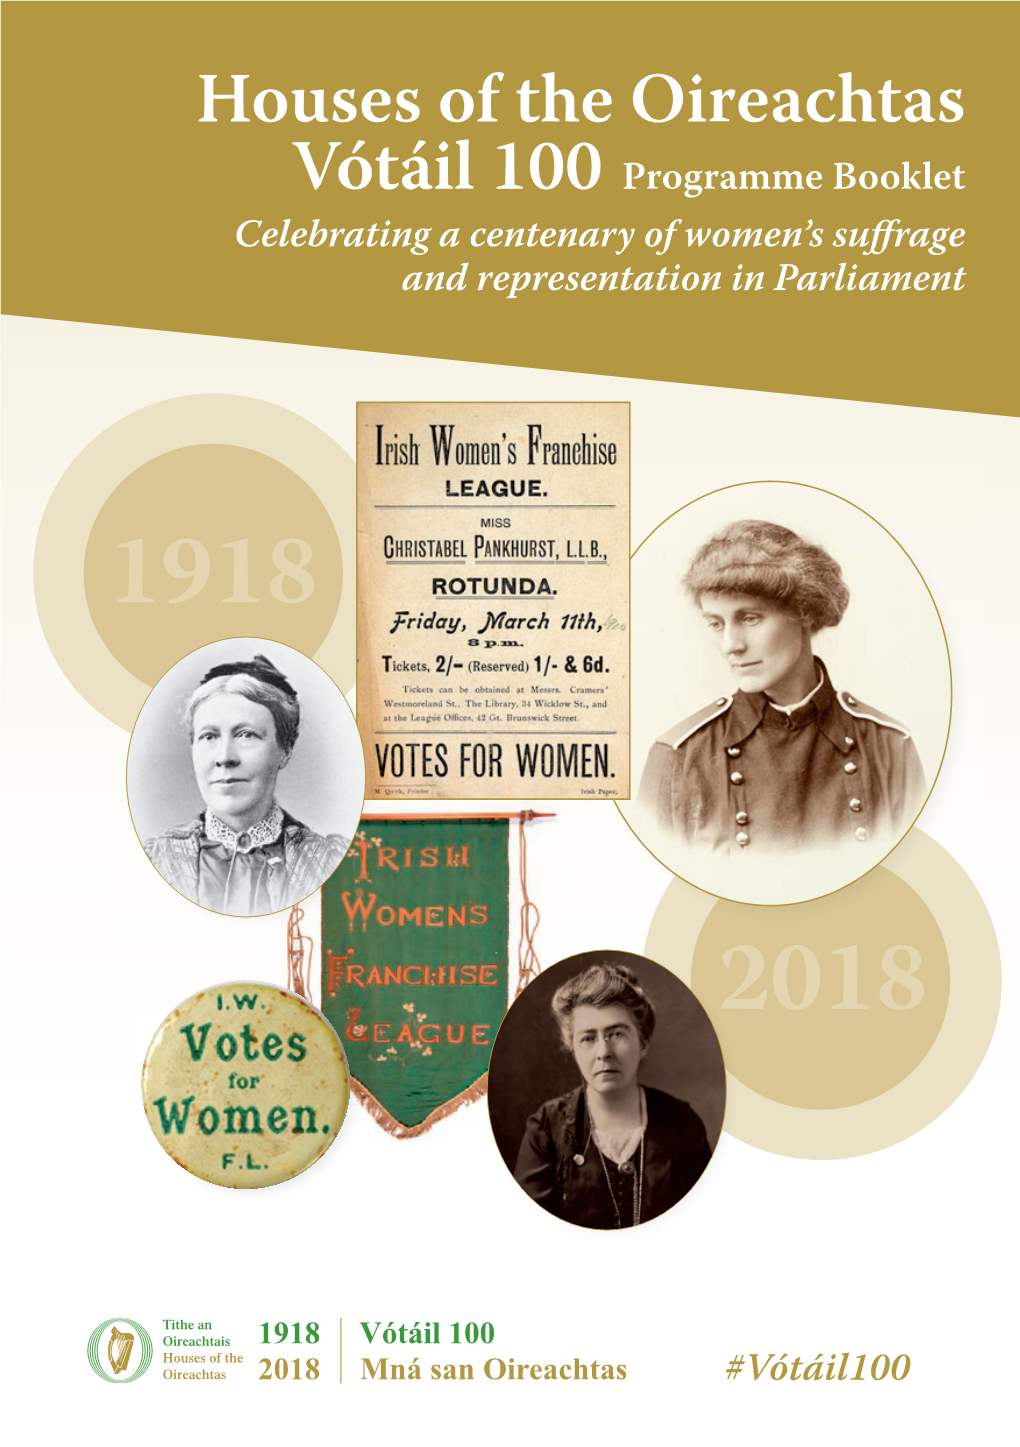 Houses of the Oireachtas Vótáil 100 Programme Booklet Celebrating a Centenary of Women’S Suffrage and Representation in Parliament